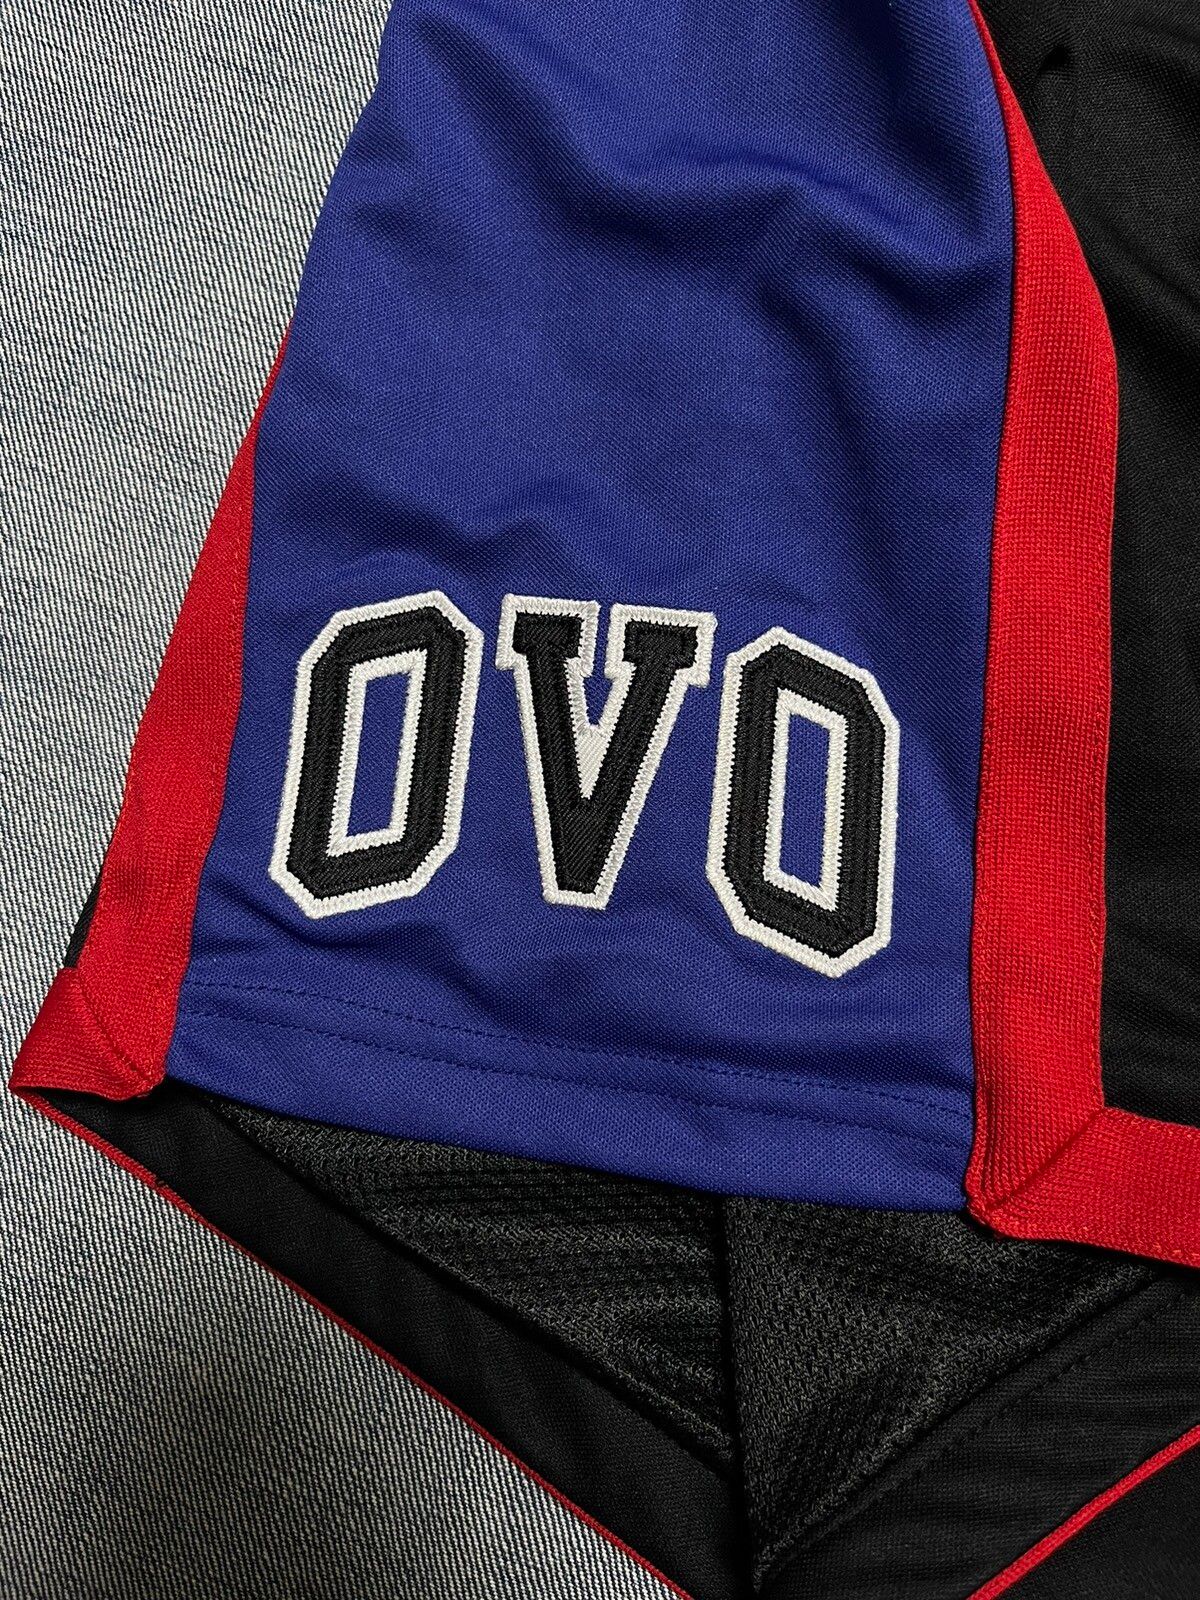 Octobers Very Own OVO Drake Basketball Shorts Black Size L - 5